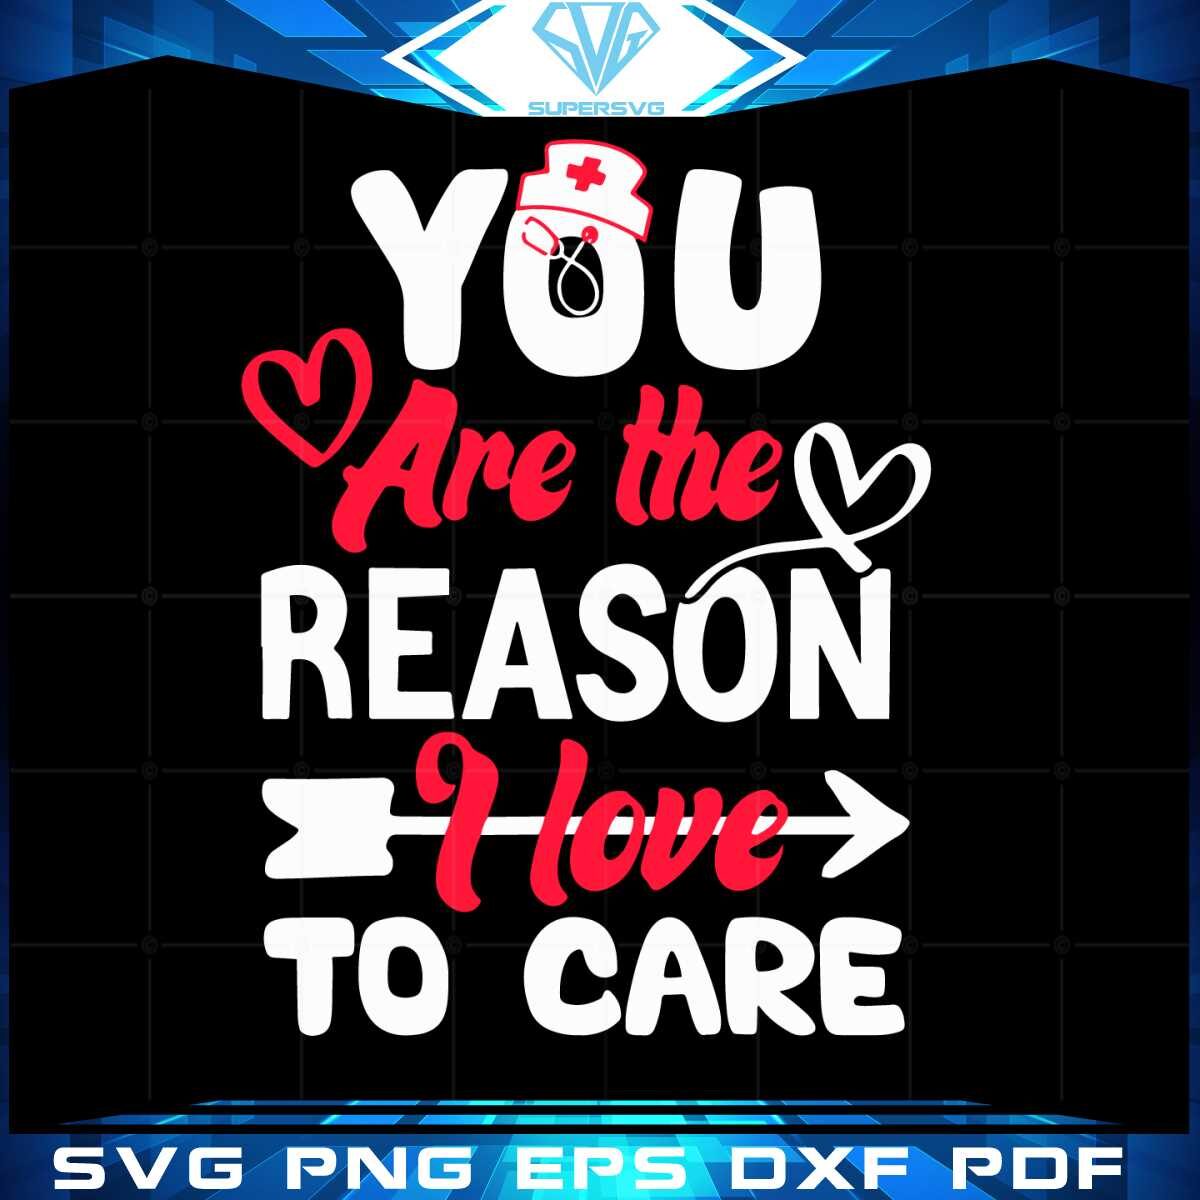 you-are-the-reason-i-love-to-care-nurse-valentines-day-svg